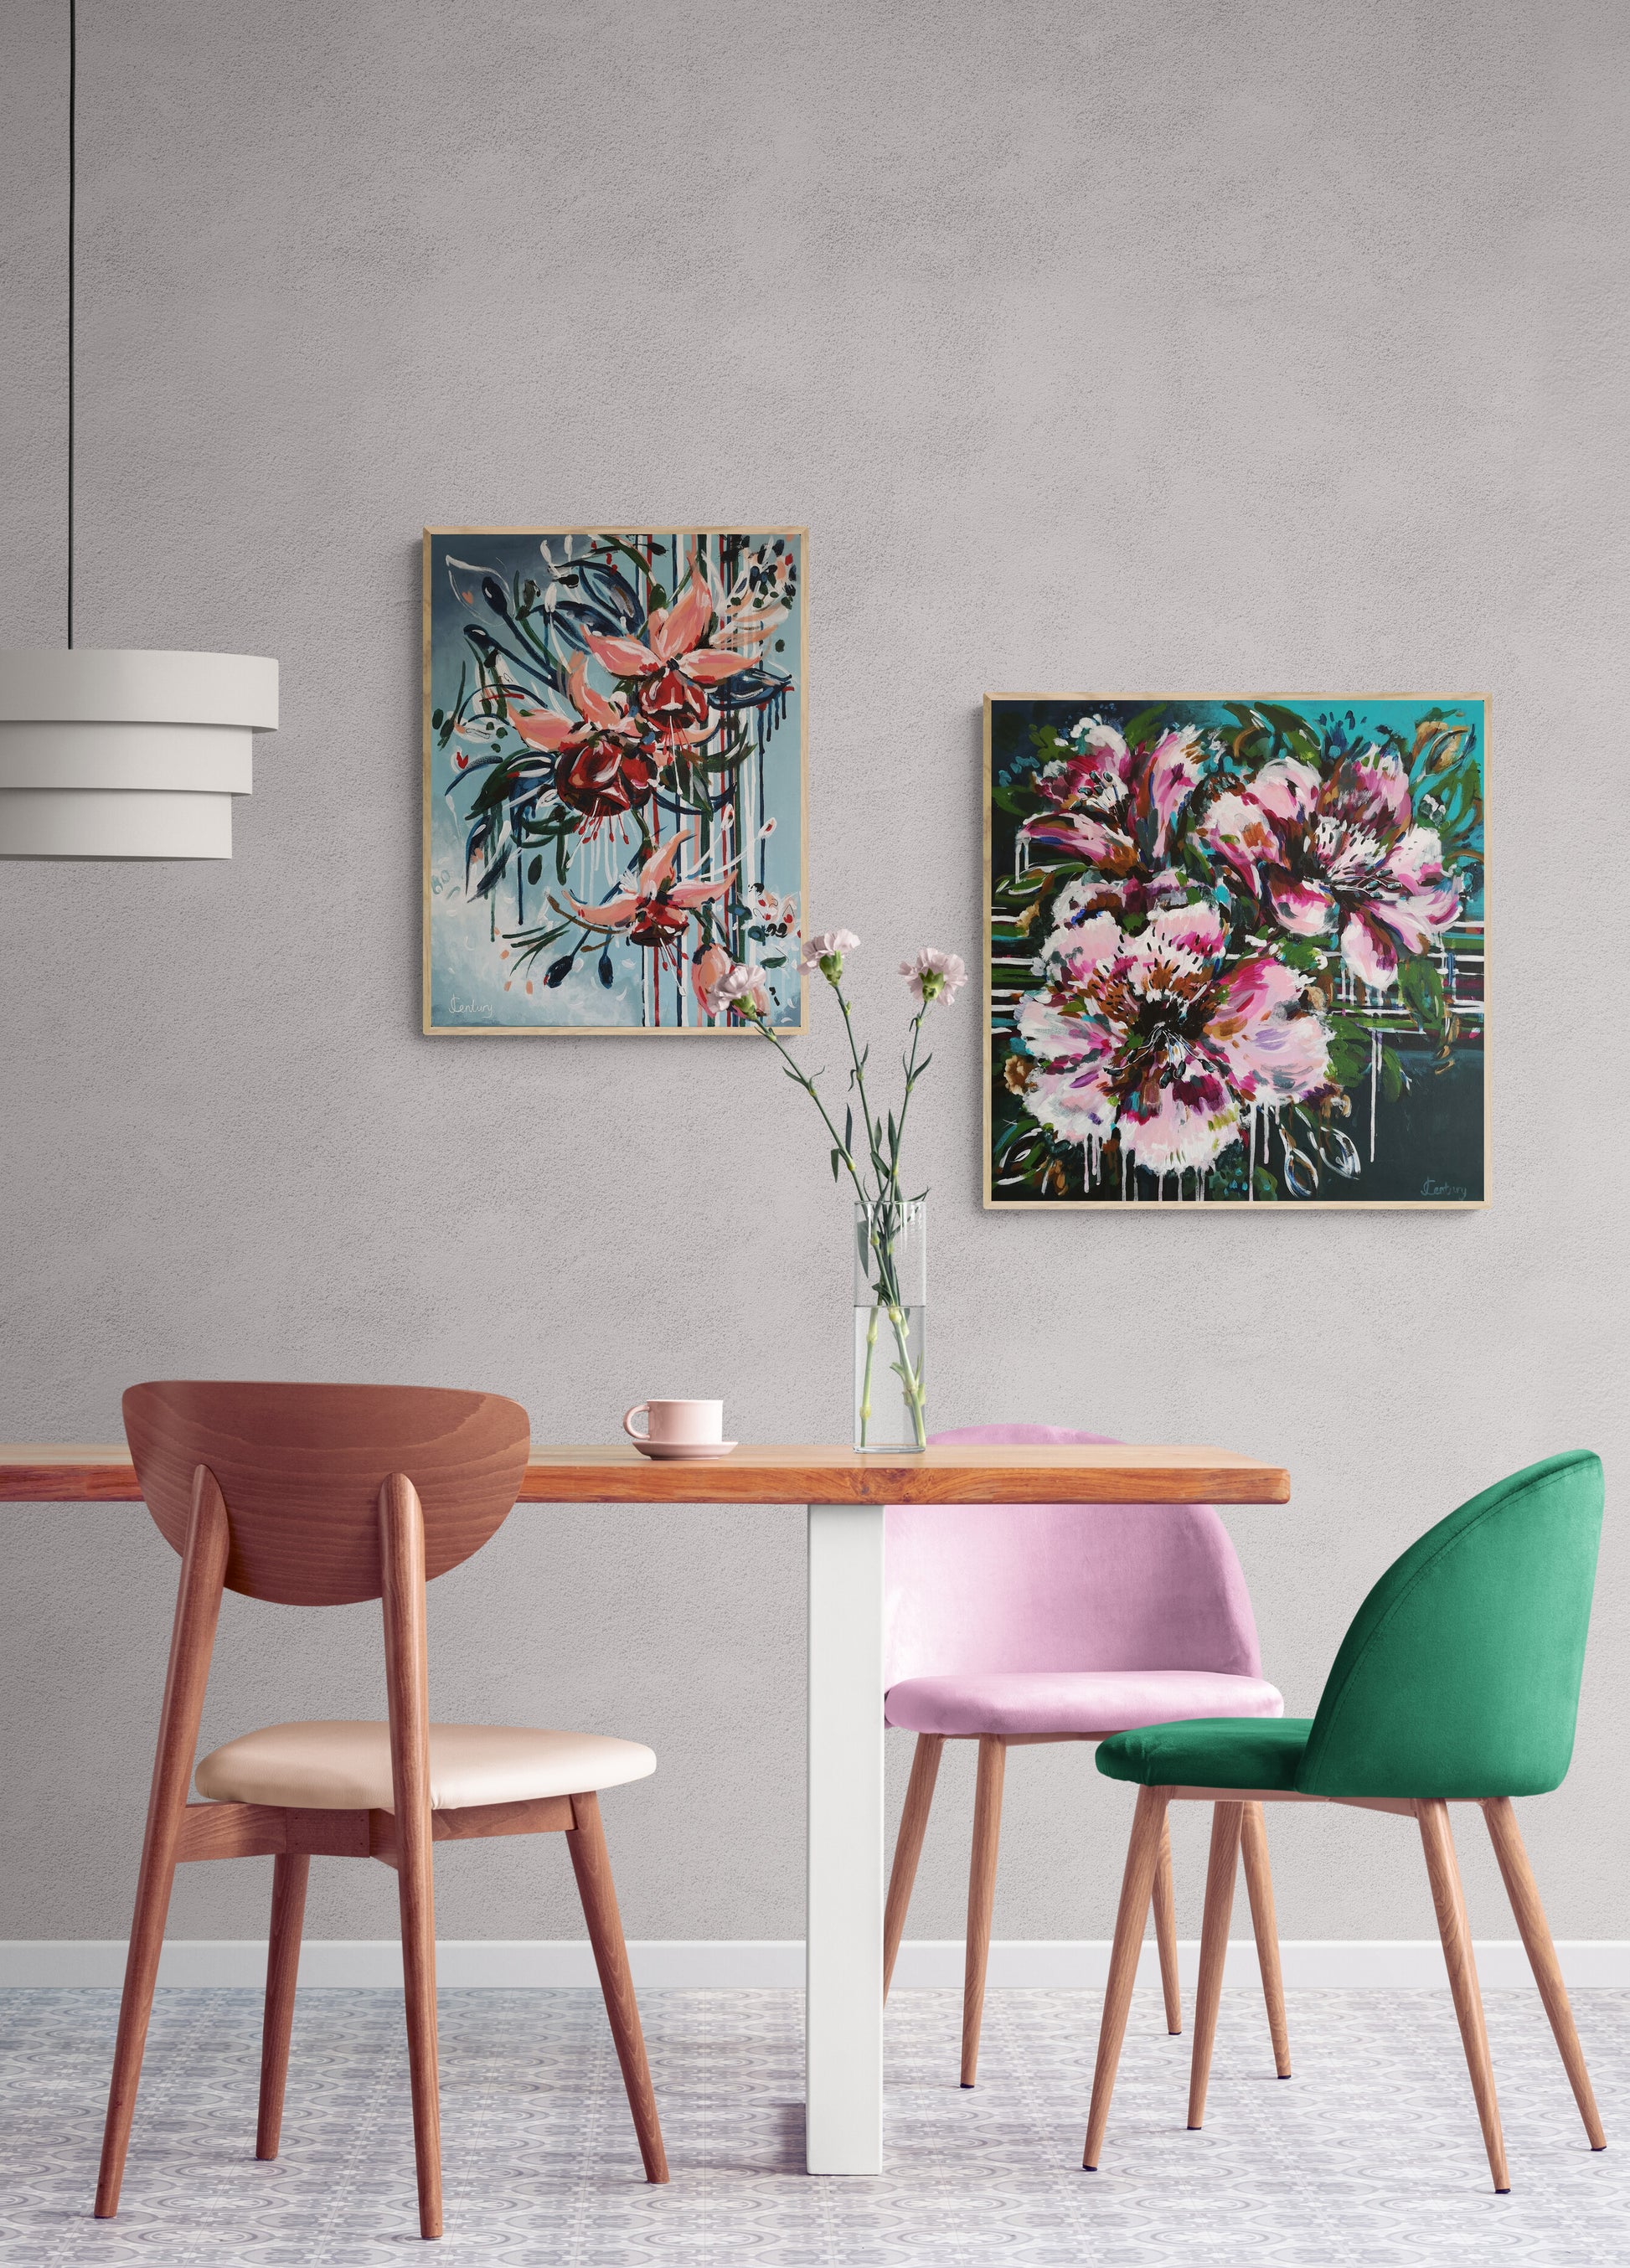 Home decor inspiration wall art ideas from Judy Century. Two abstract floral colourful paintings hanging in a dining room with multicoloured chairs